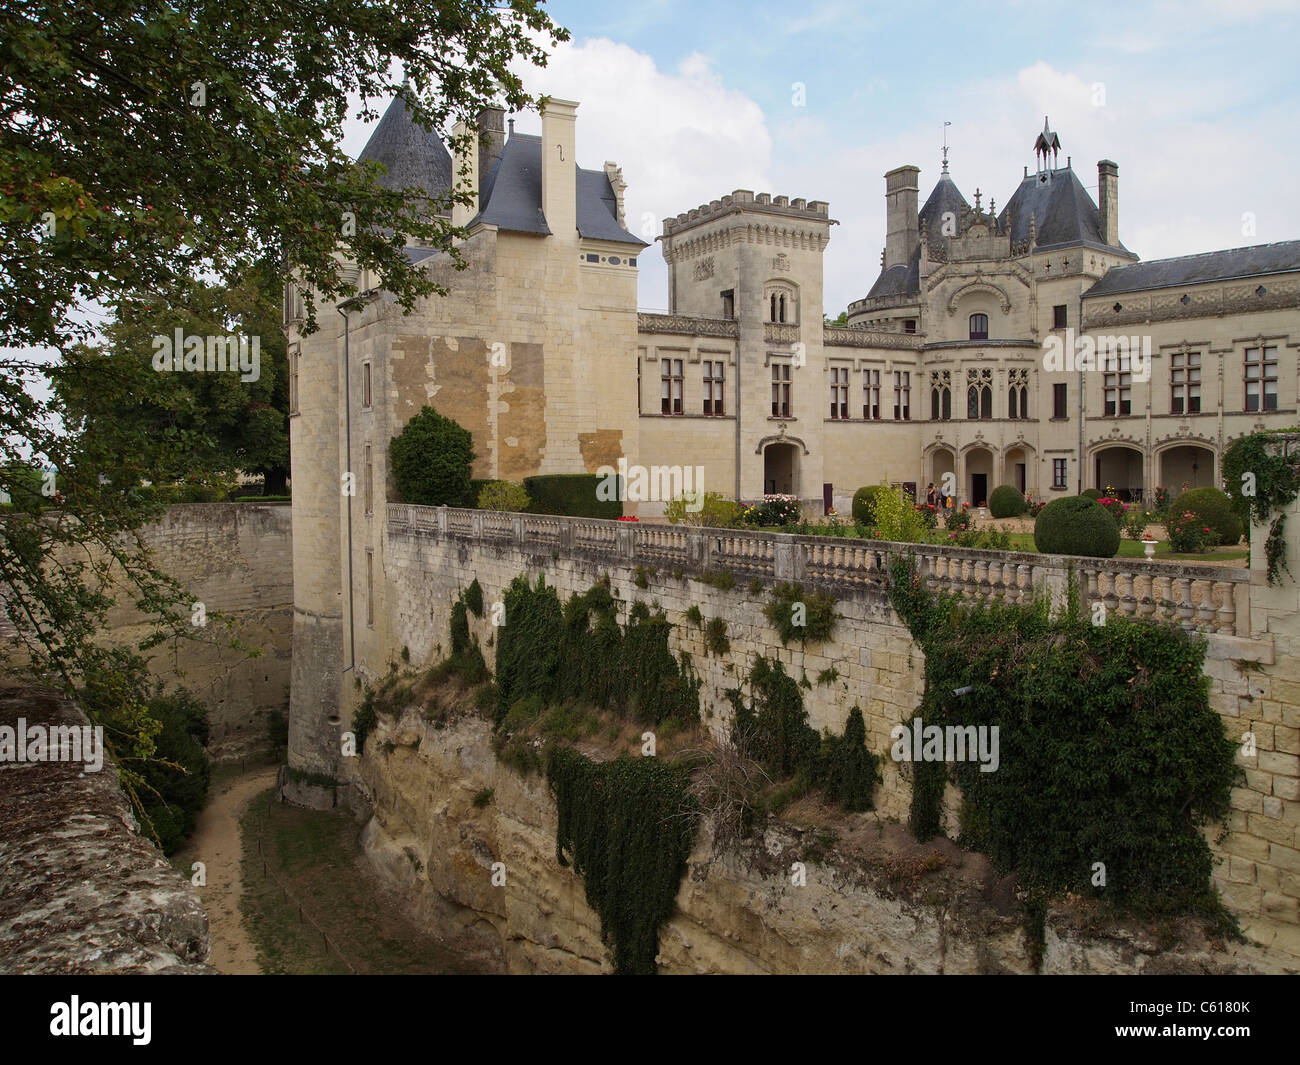 Chateau de Breze has an extremely deep dry moat. Loire valley, France Stock Photo